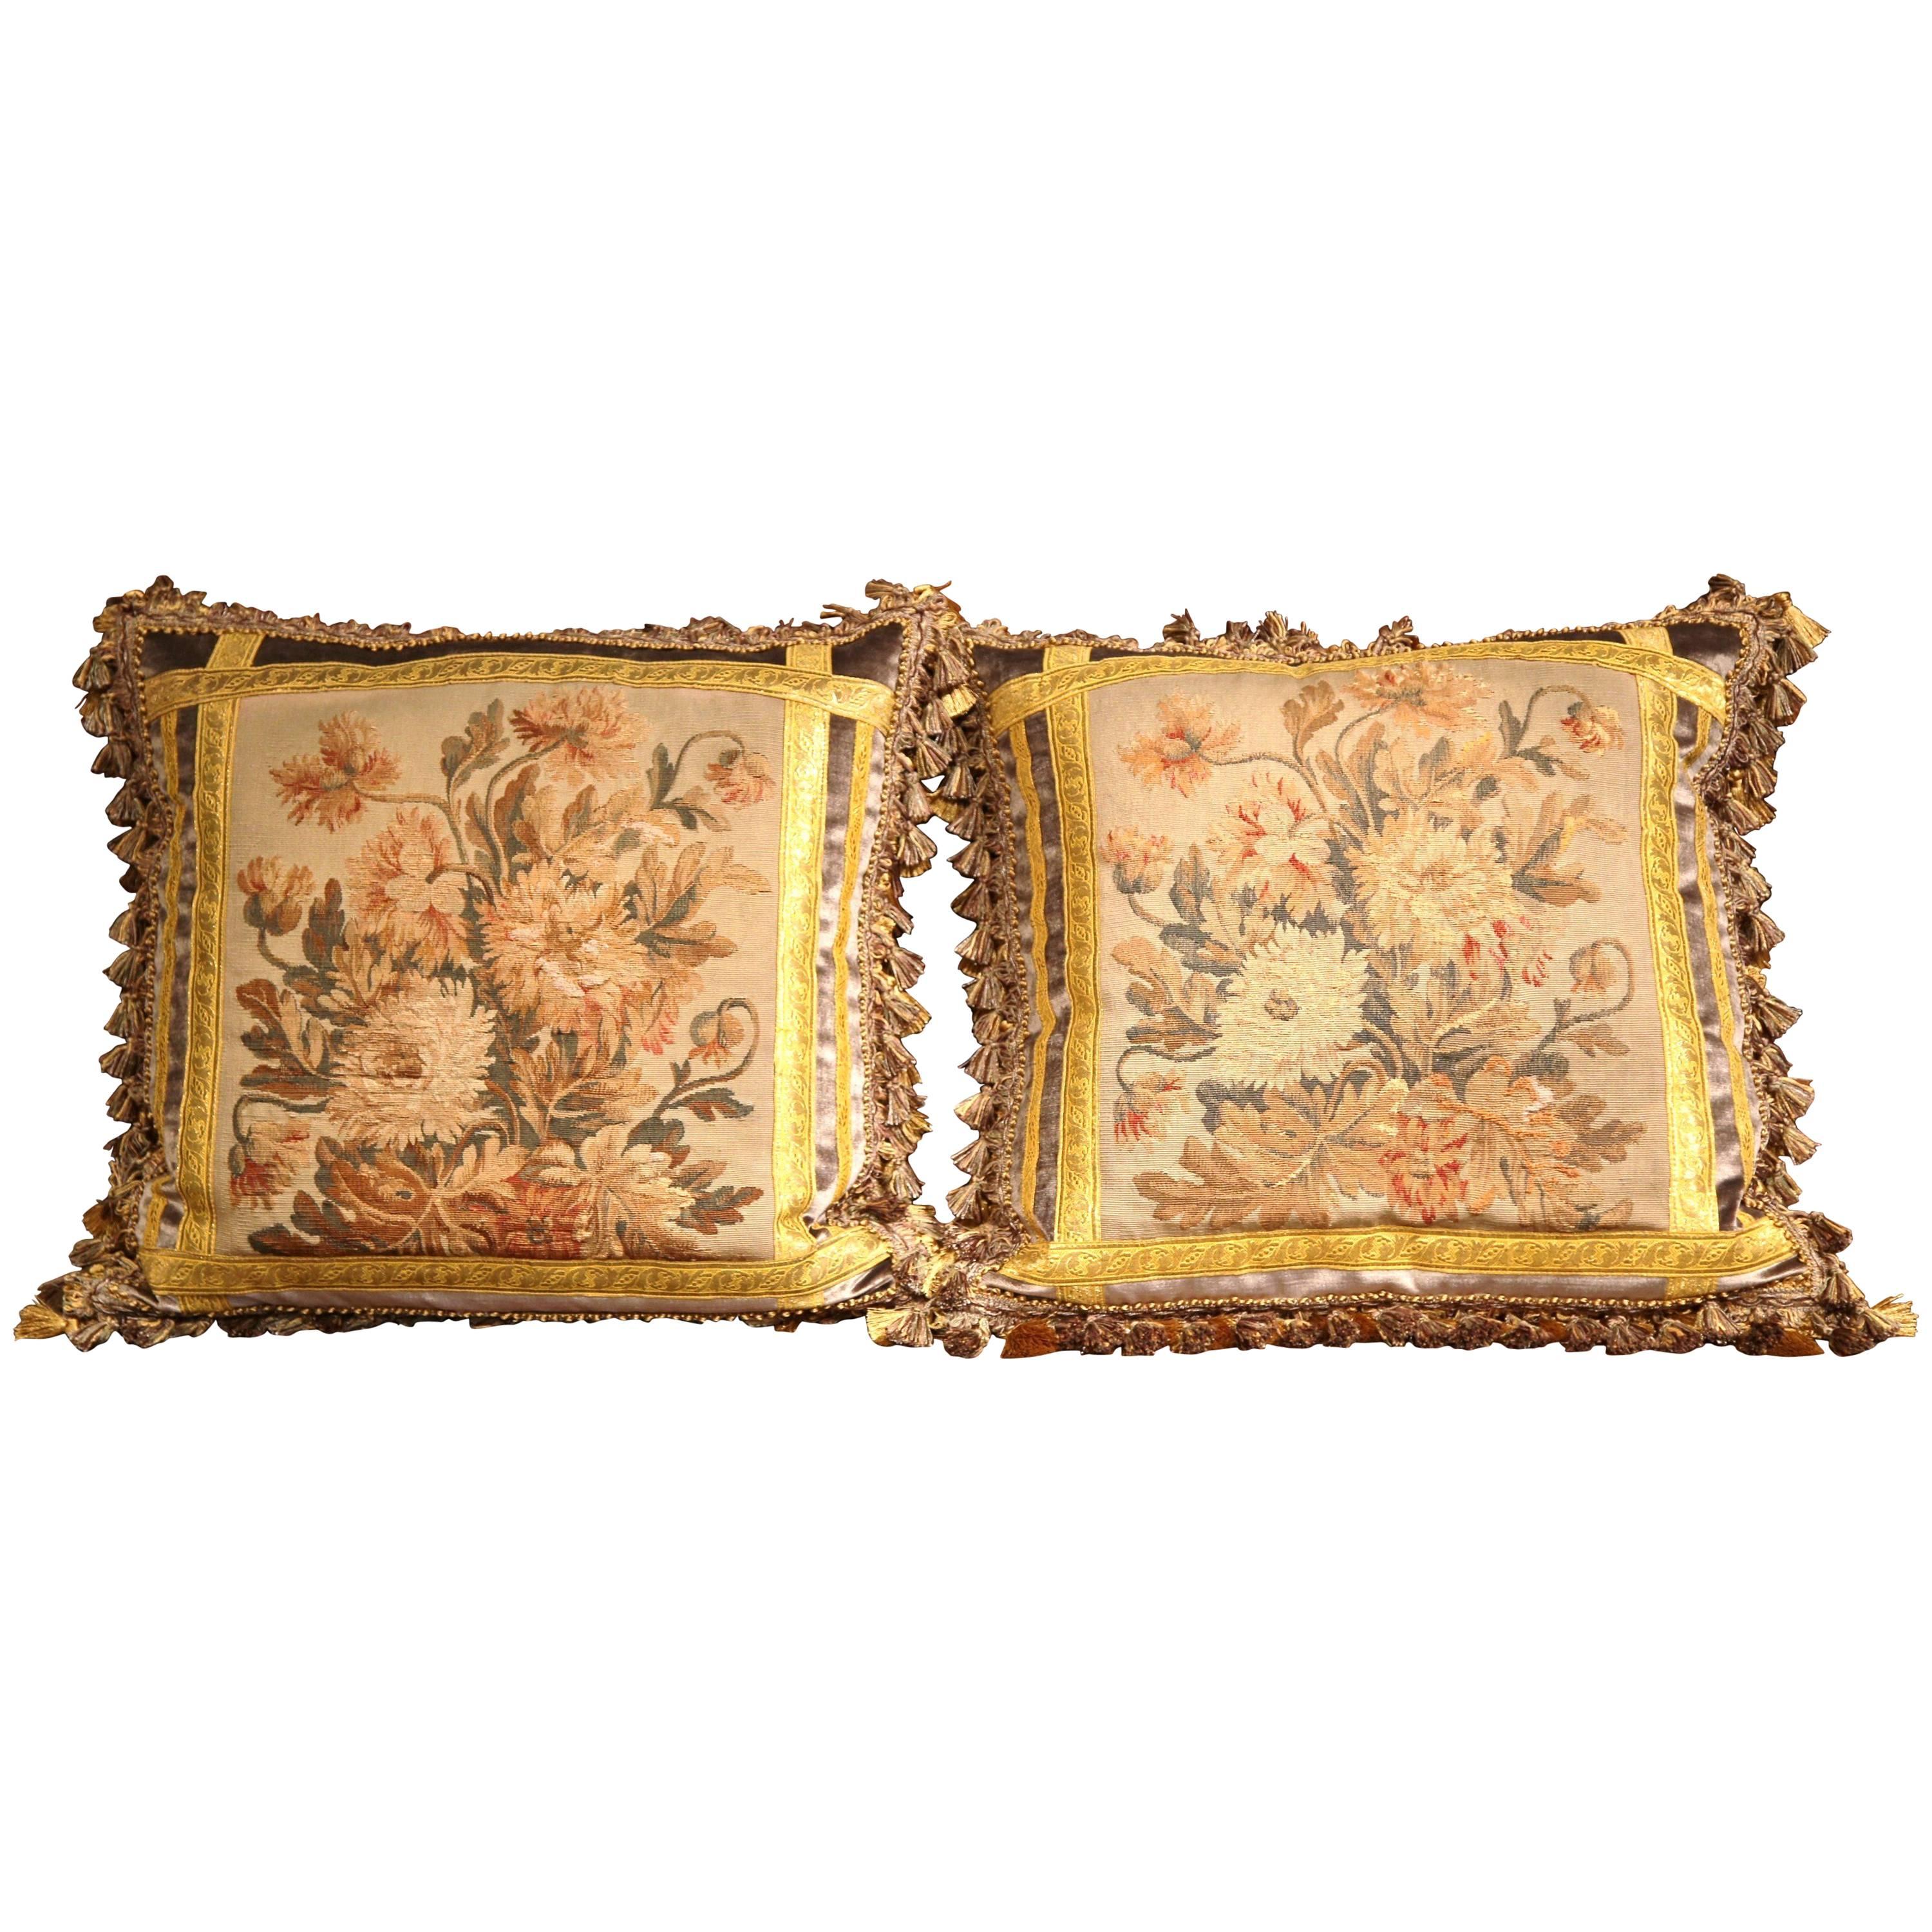 Pair of Pillows Made with 18th Century Aubusson Tapestry, Tassels and Gold Trims